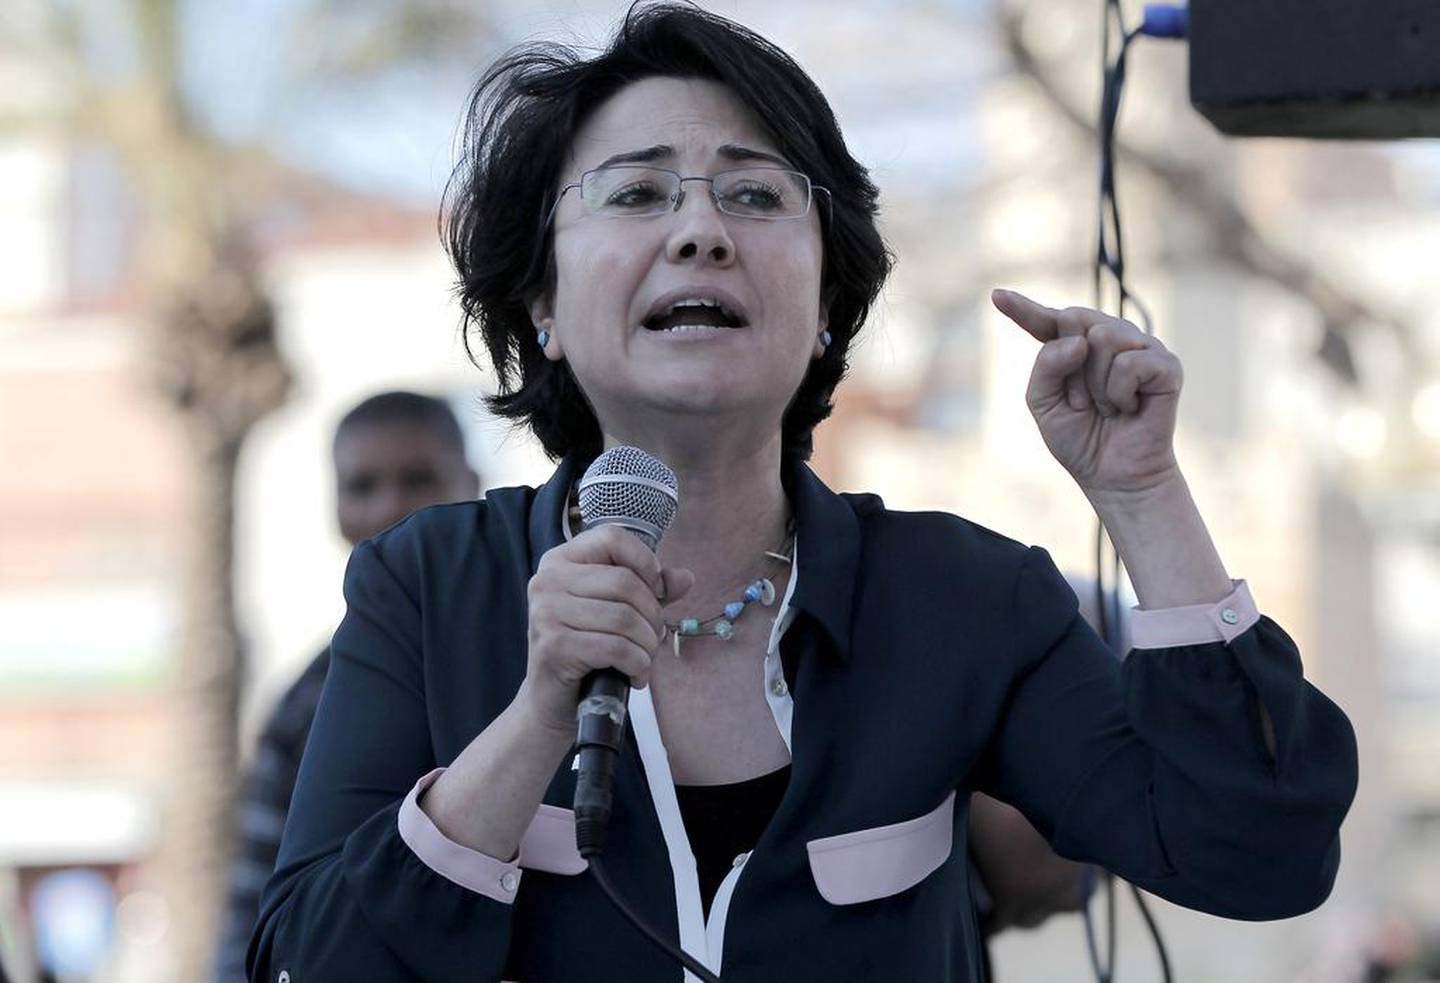 Hanin Zoabi, a member of Knesset for the Arab Israeli party Balad, caused controversy in November 2015 by comparing discriminatory Israeli policies to those of the Nazis against Jews. AFP